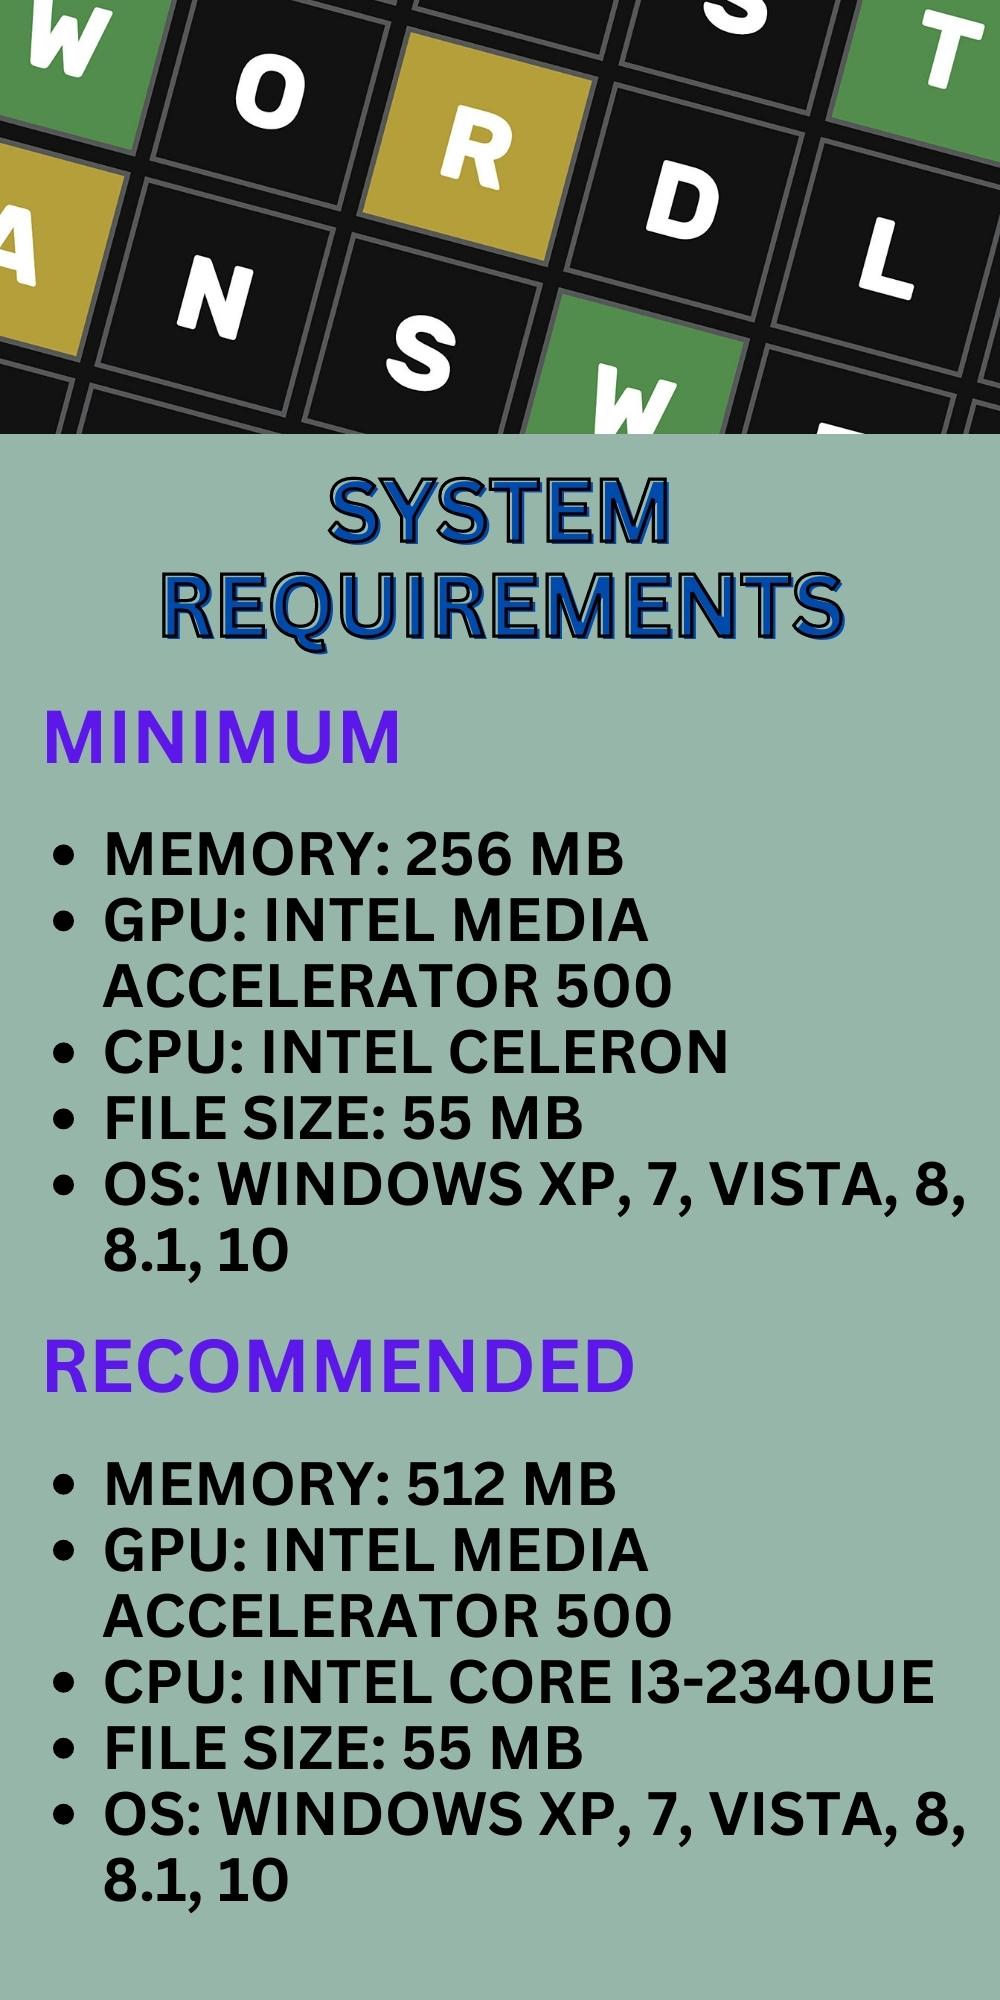 Wordle System Requirements